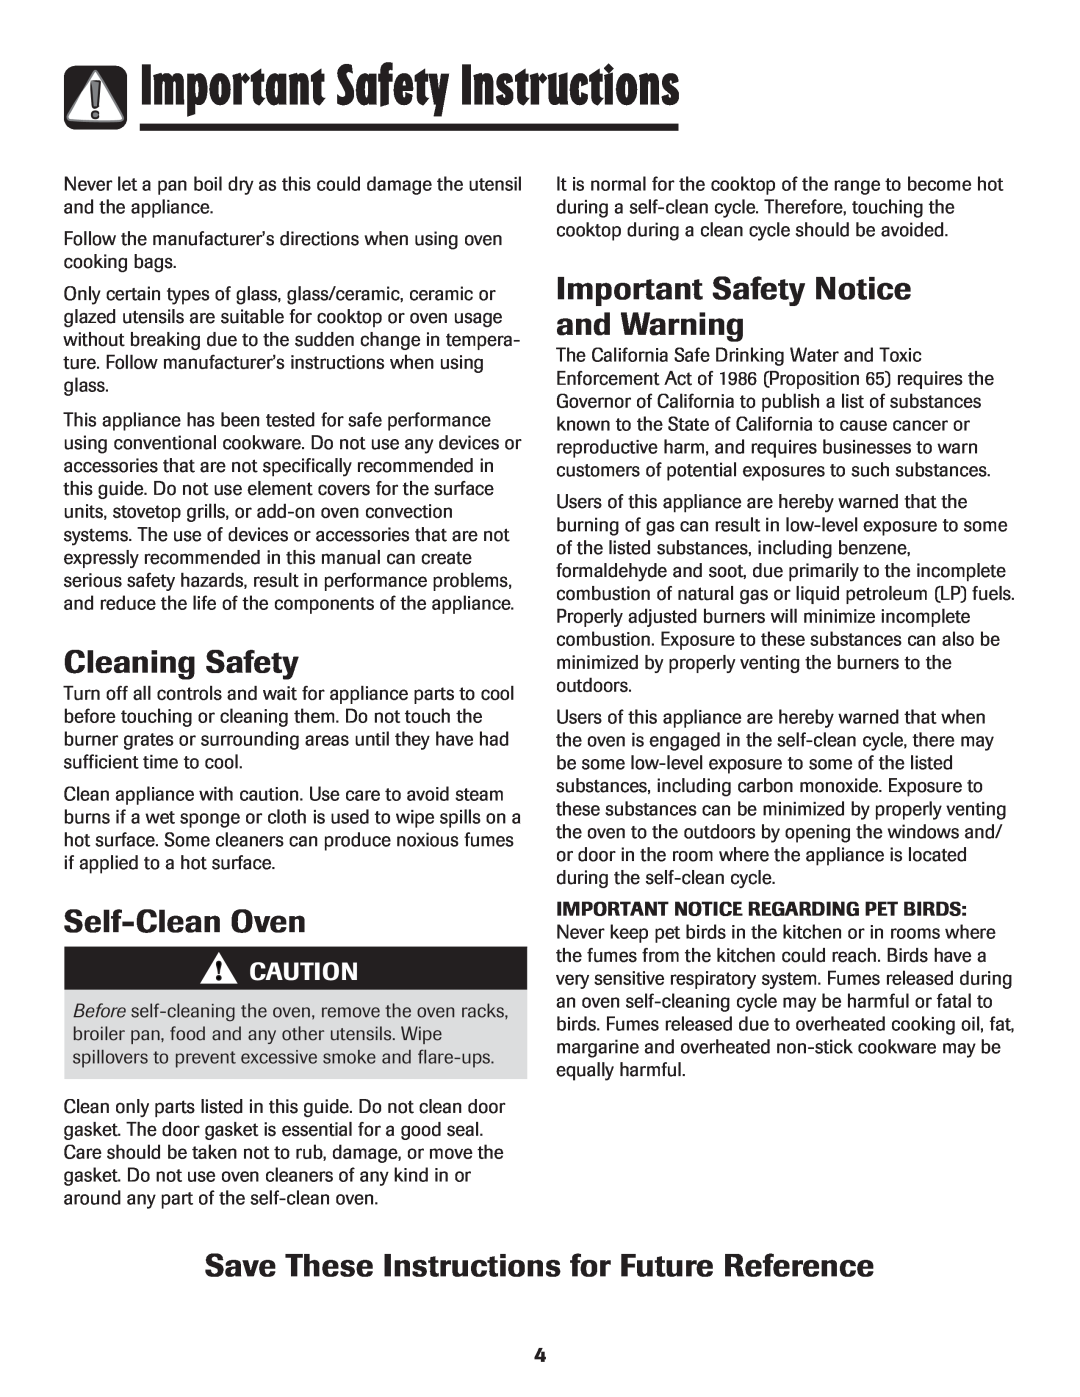 Maytag MGR5775QDW Cleaning Safety, Self-Clean Oven, Important Safety Notice and Warning, Important Safety Instructions 